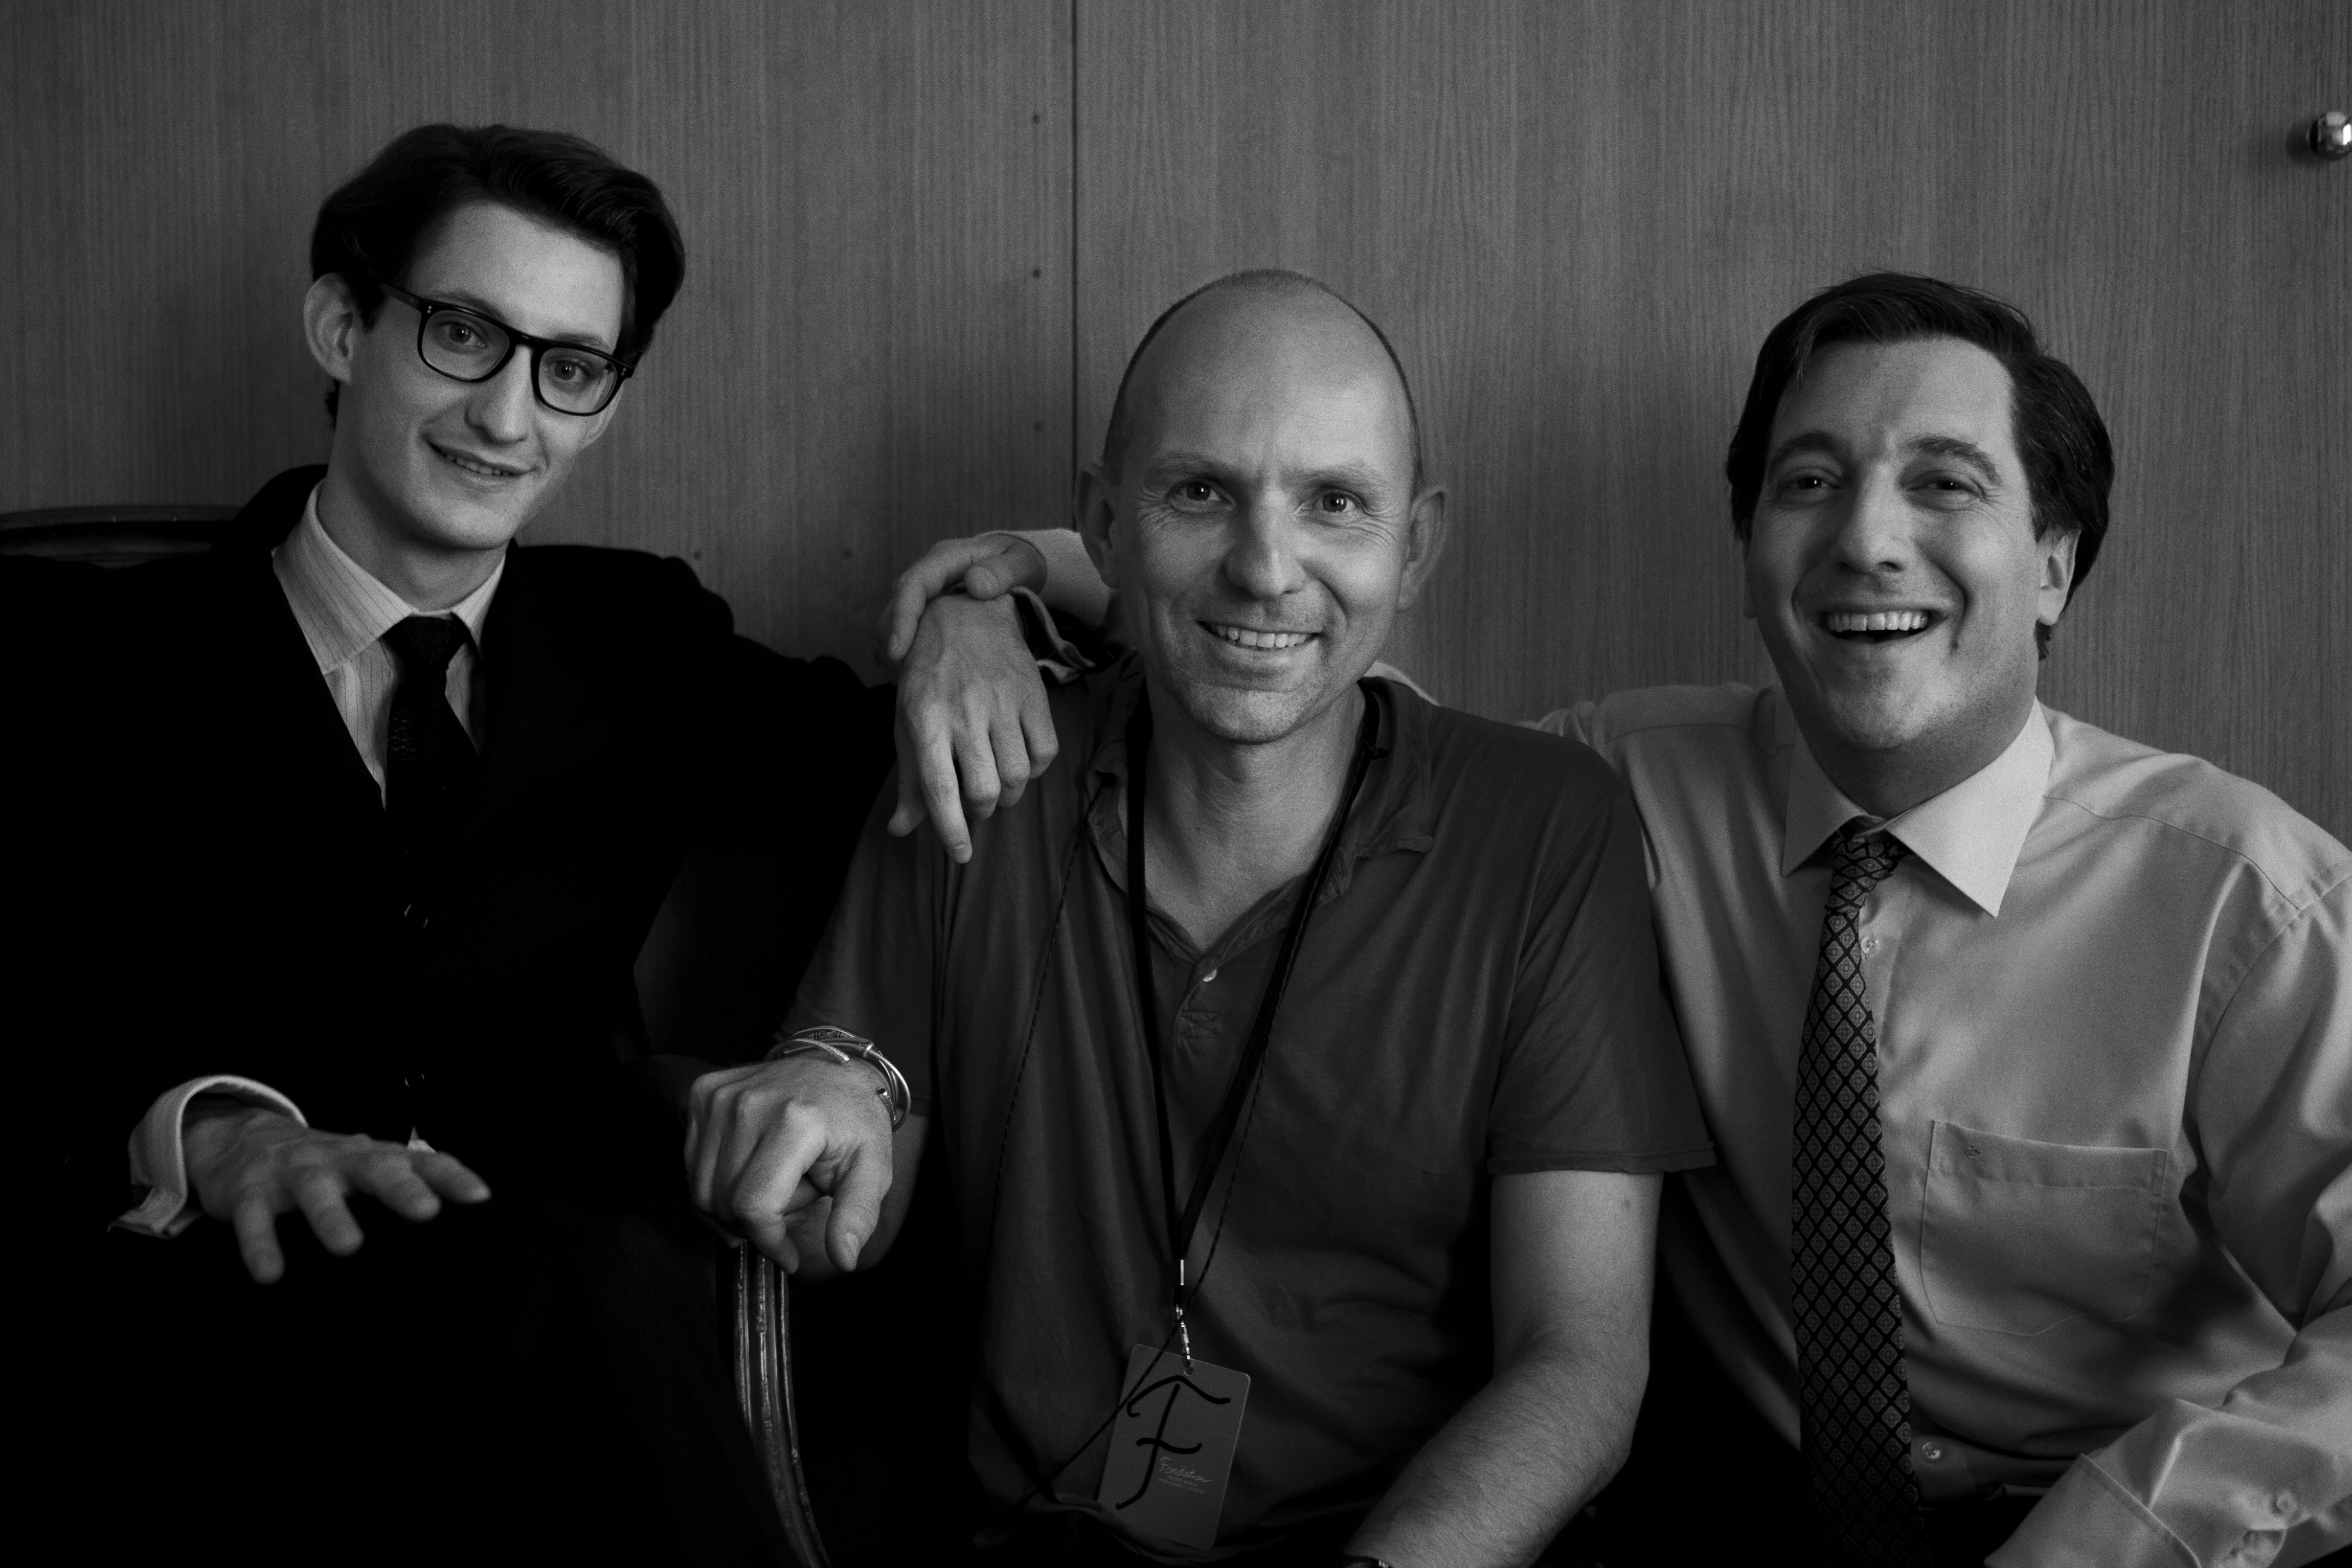 Yves-Saint Laurent directed by Jalil Lespert 2013-Pierre Niney, Guillaume Galienne and me